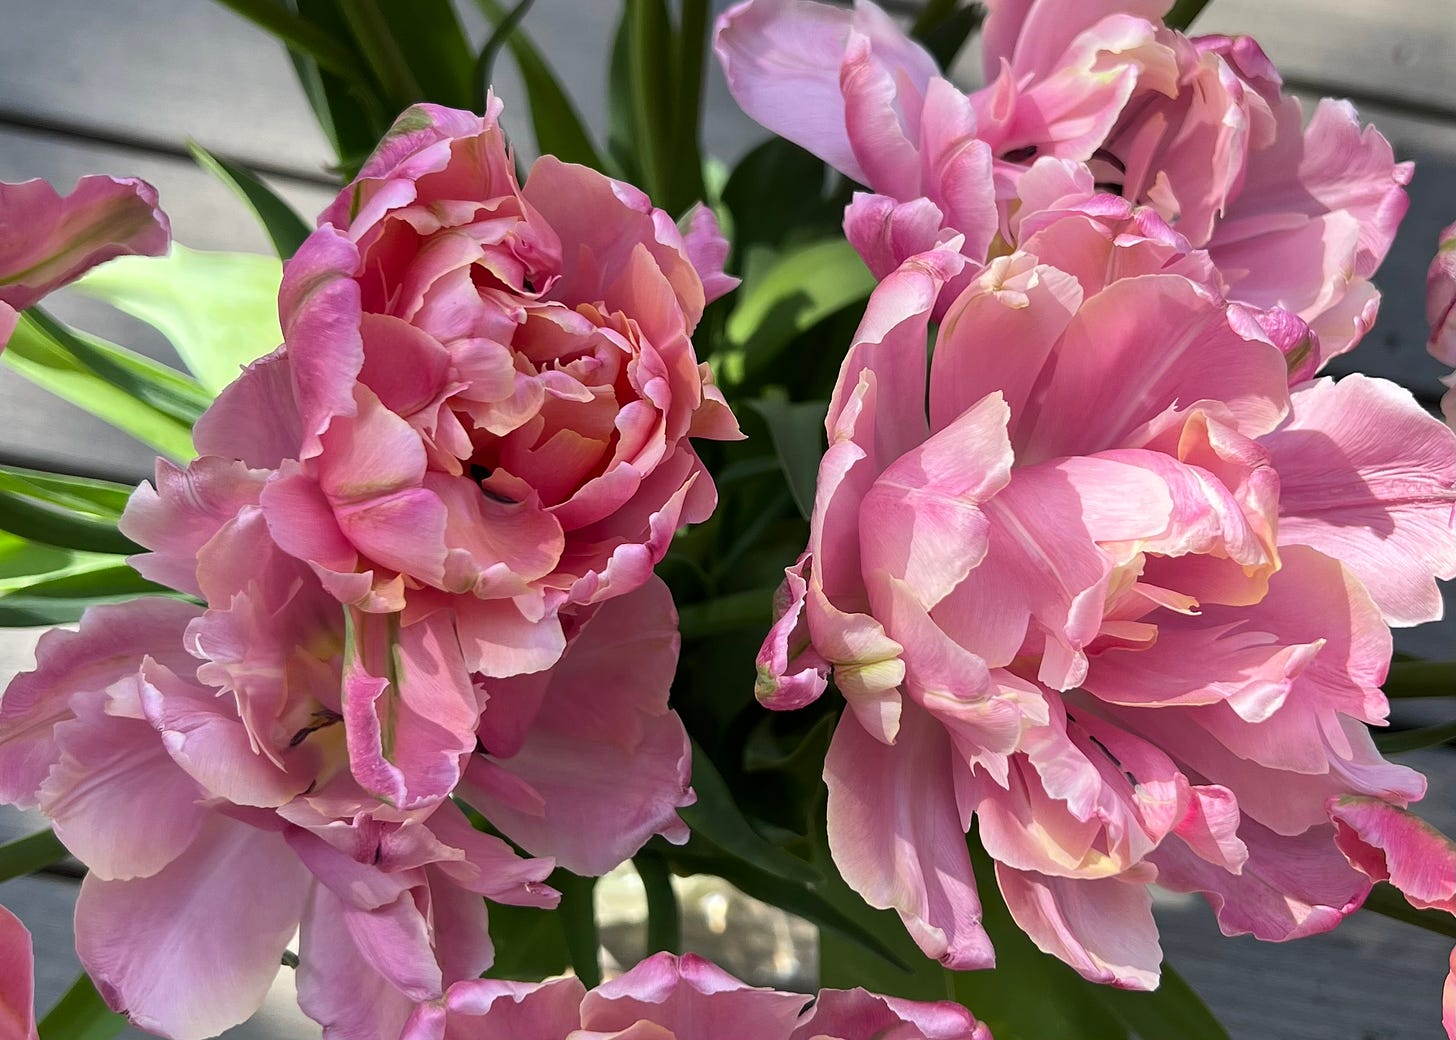 closeup of pink star tulips, double-flowered and looking like peonies, with ruffled pink-cream-peach petals